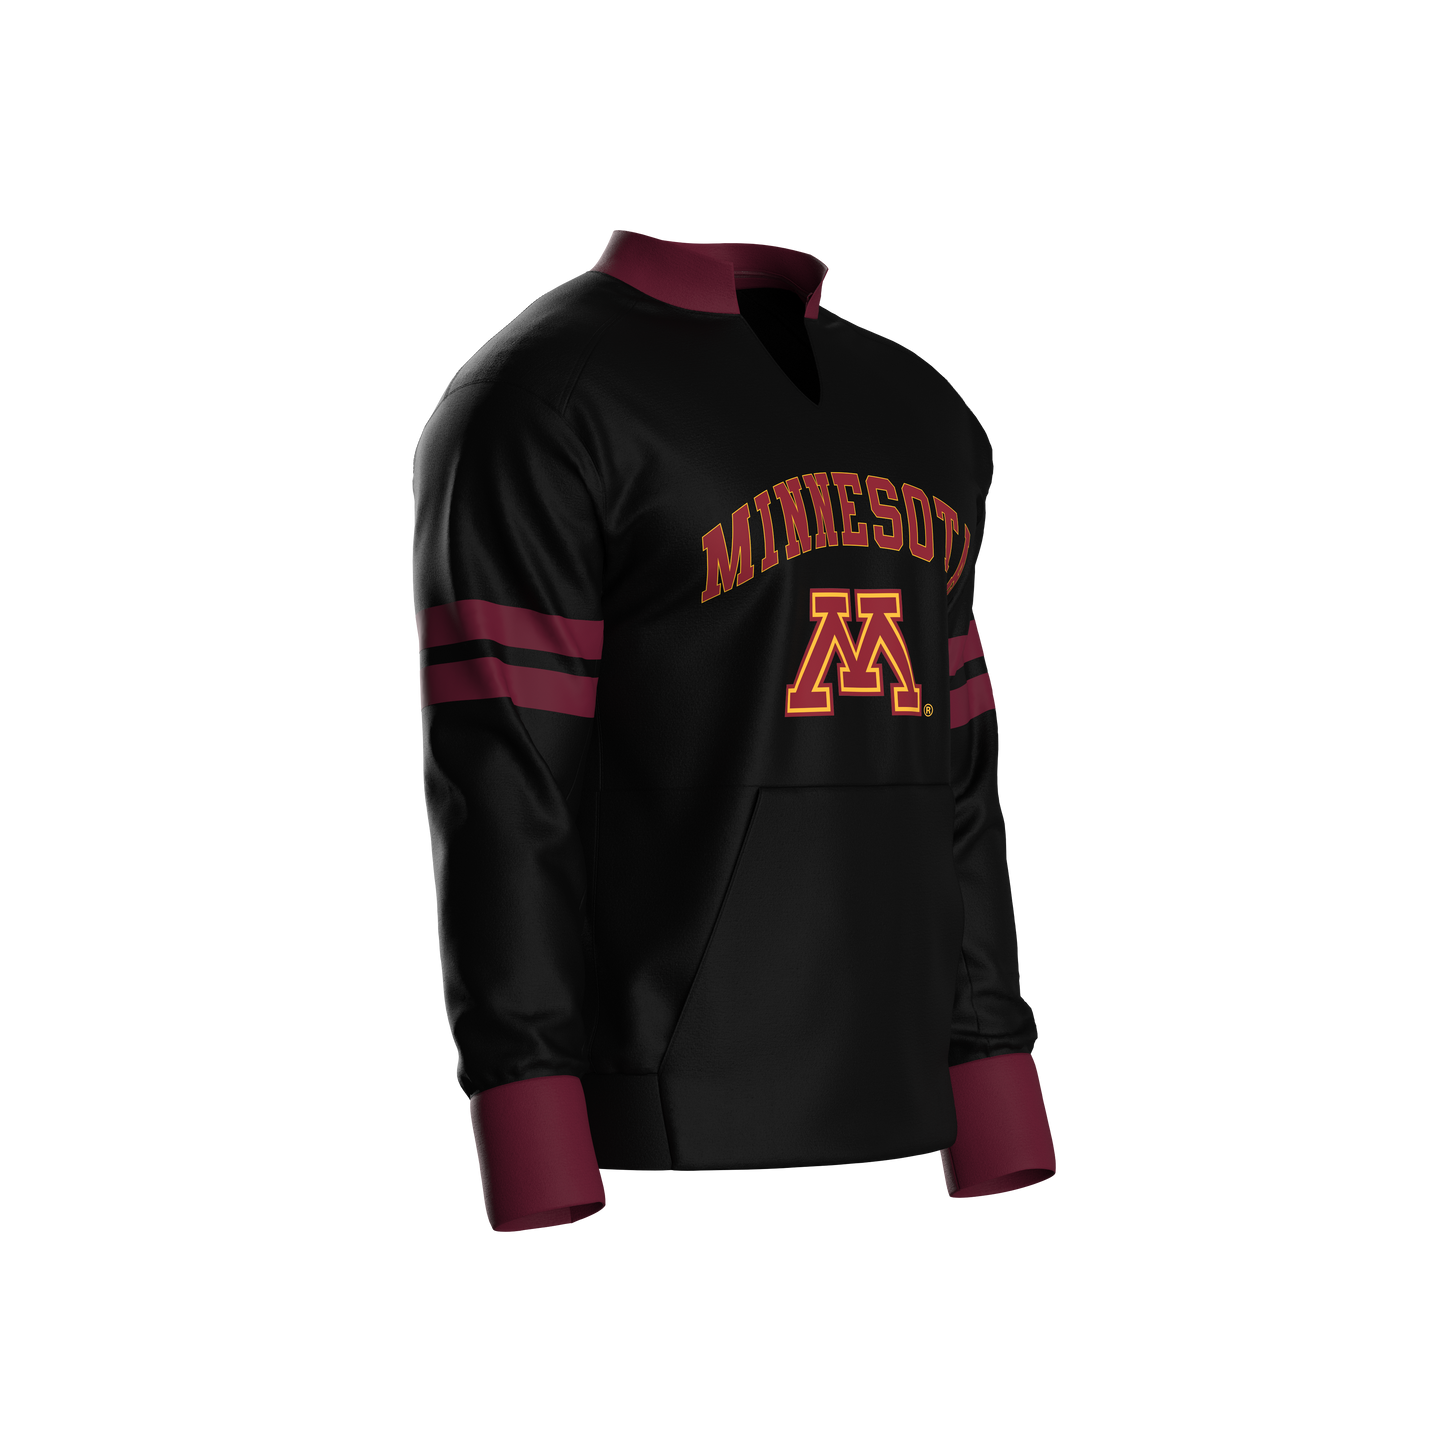 University of Minnesota Away Pullover (youth)